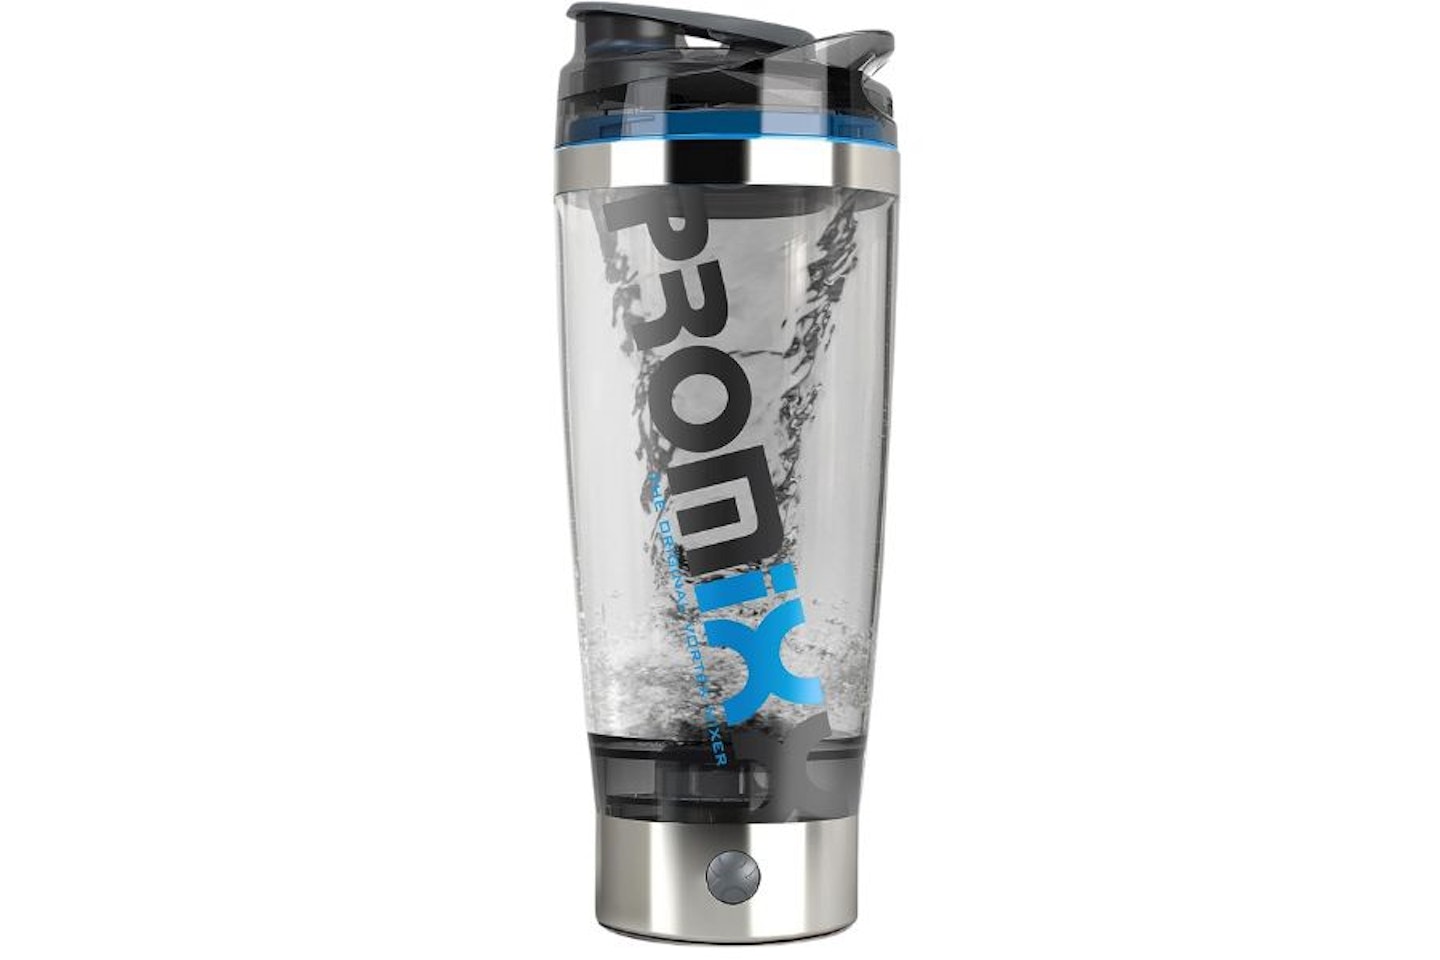 The best electric protein shaker